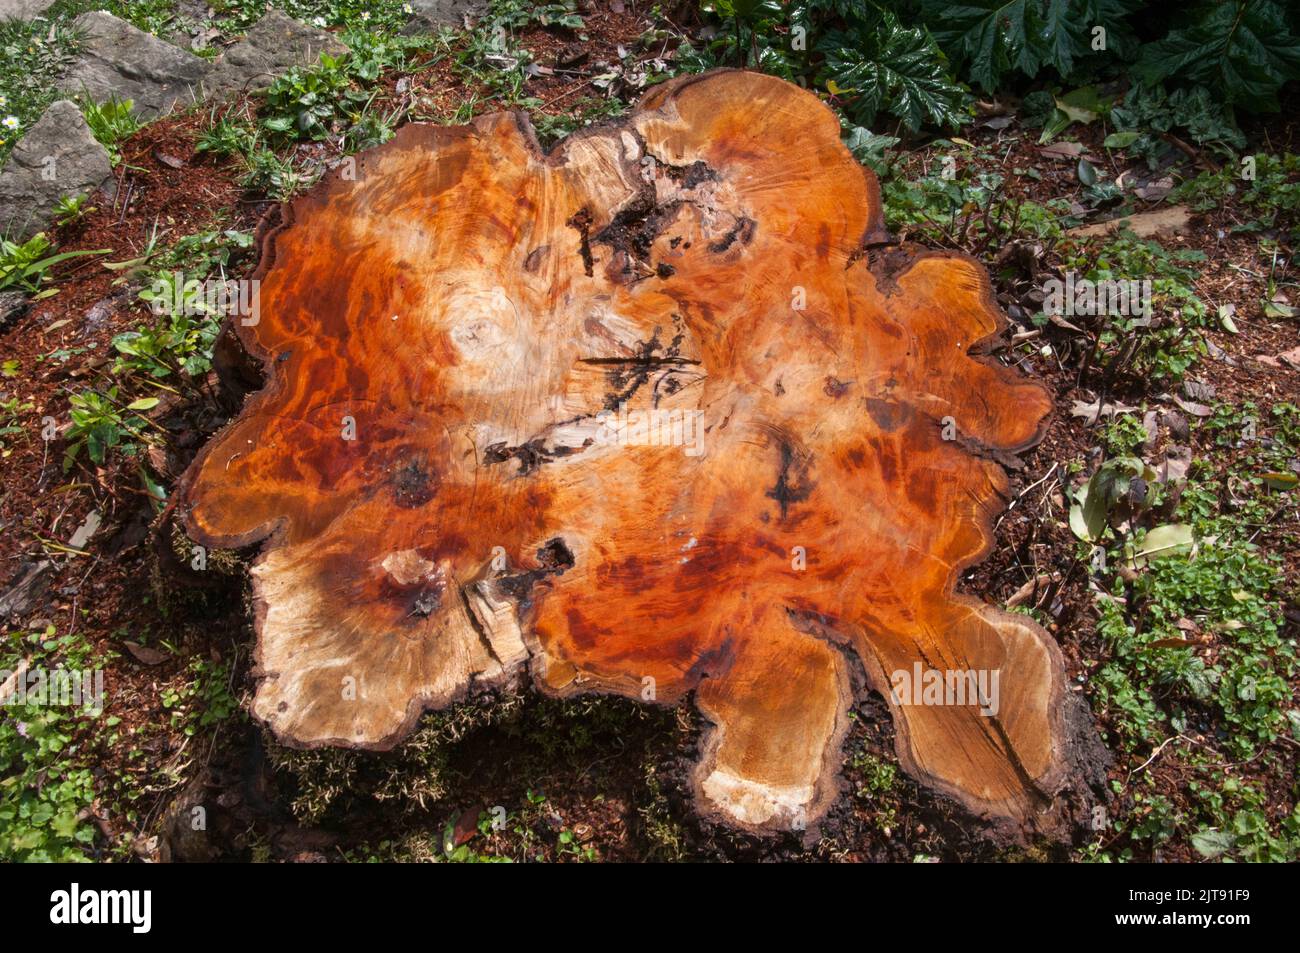 Tree stump at the Garden of St Erth, within the Wombat State Forest outside Blackwood, Victoria, Australia Stock Photo